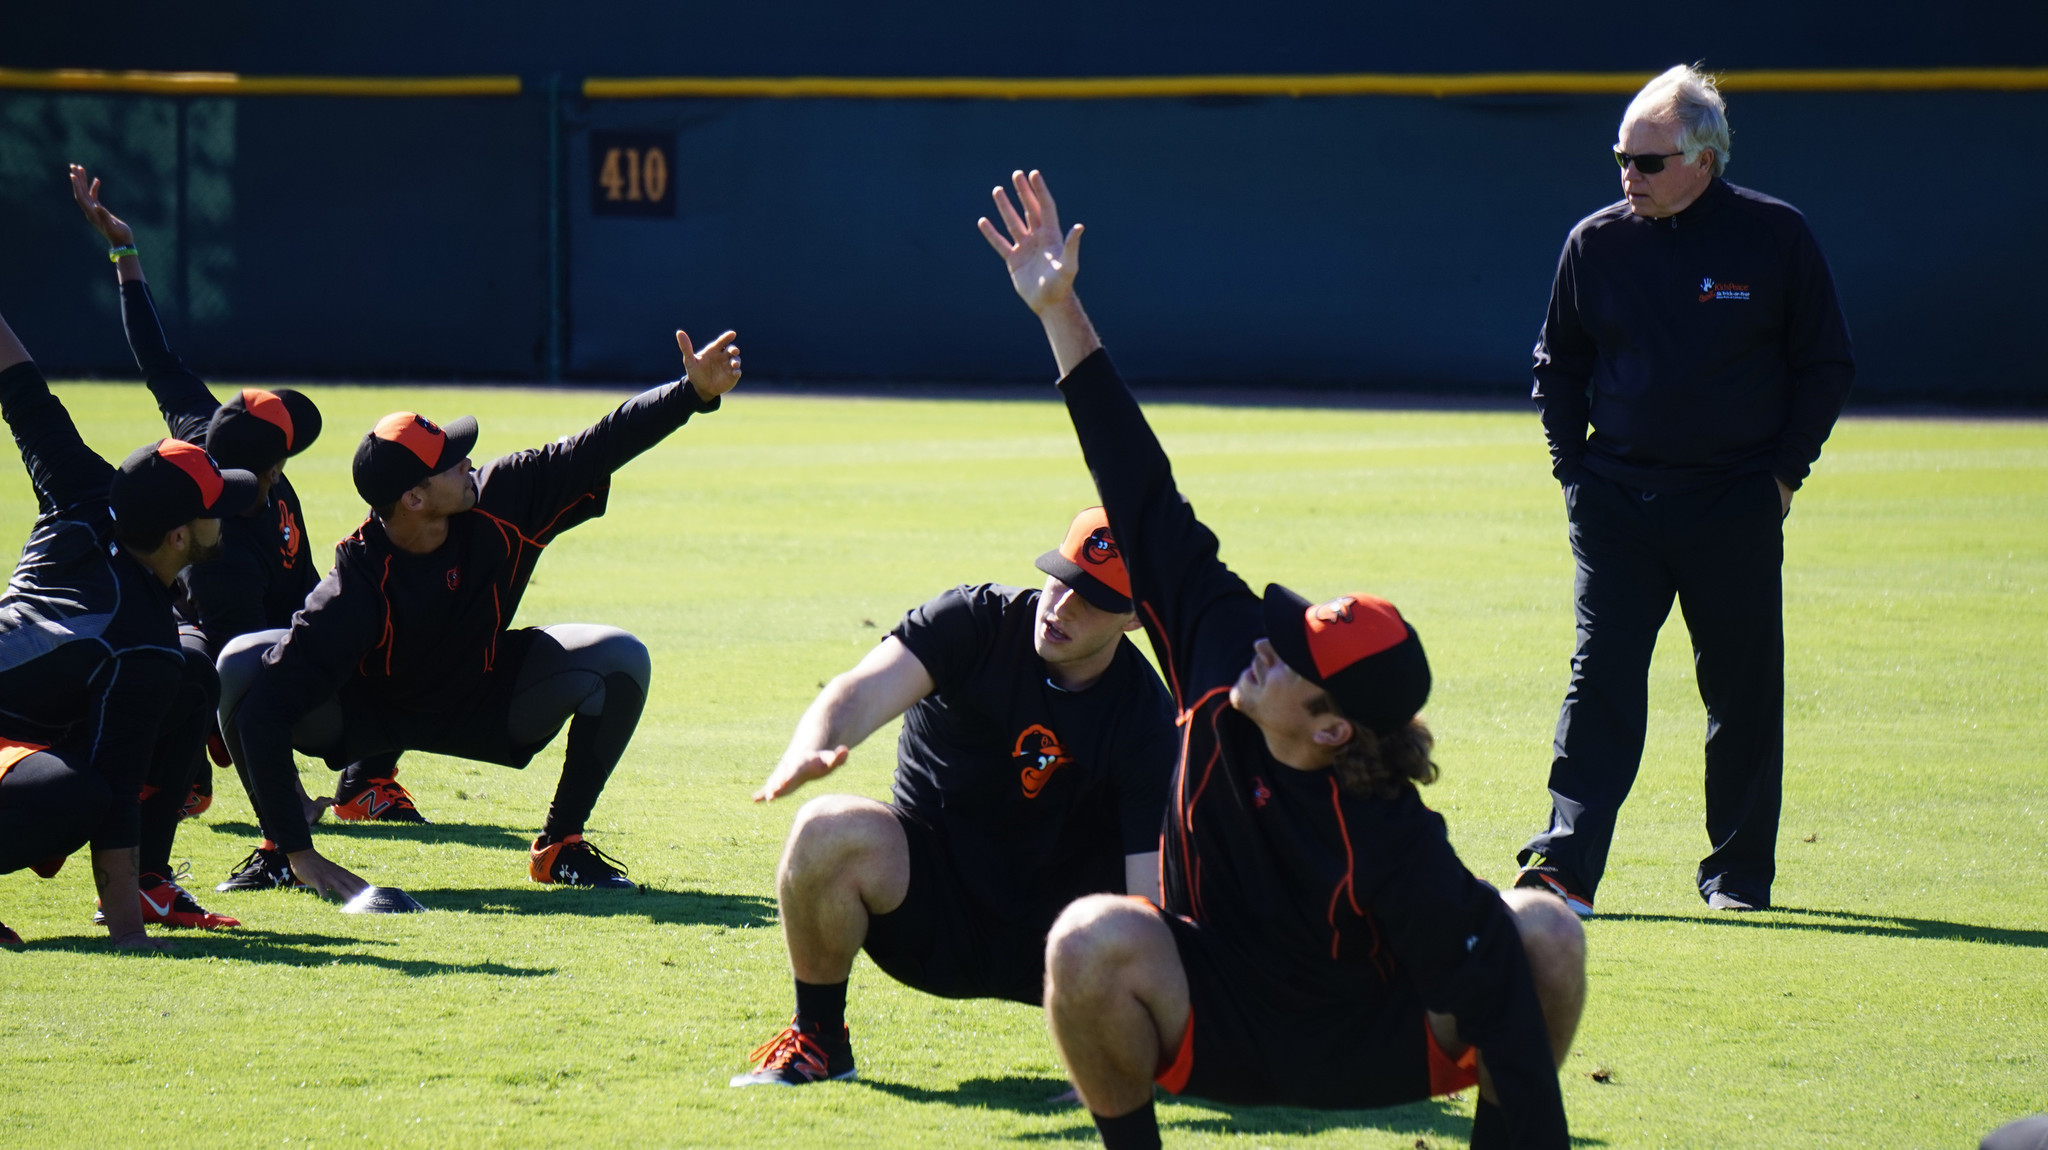 Uncovering talent through Orioles' annual minicamp becoming part of team's identity